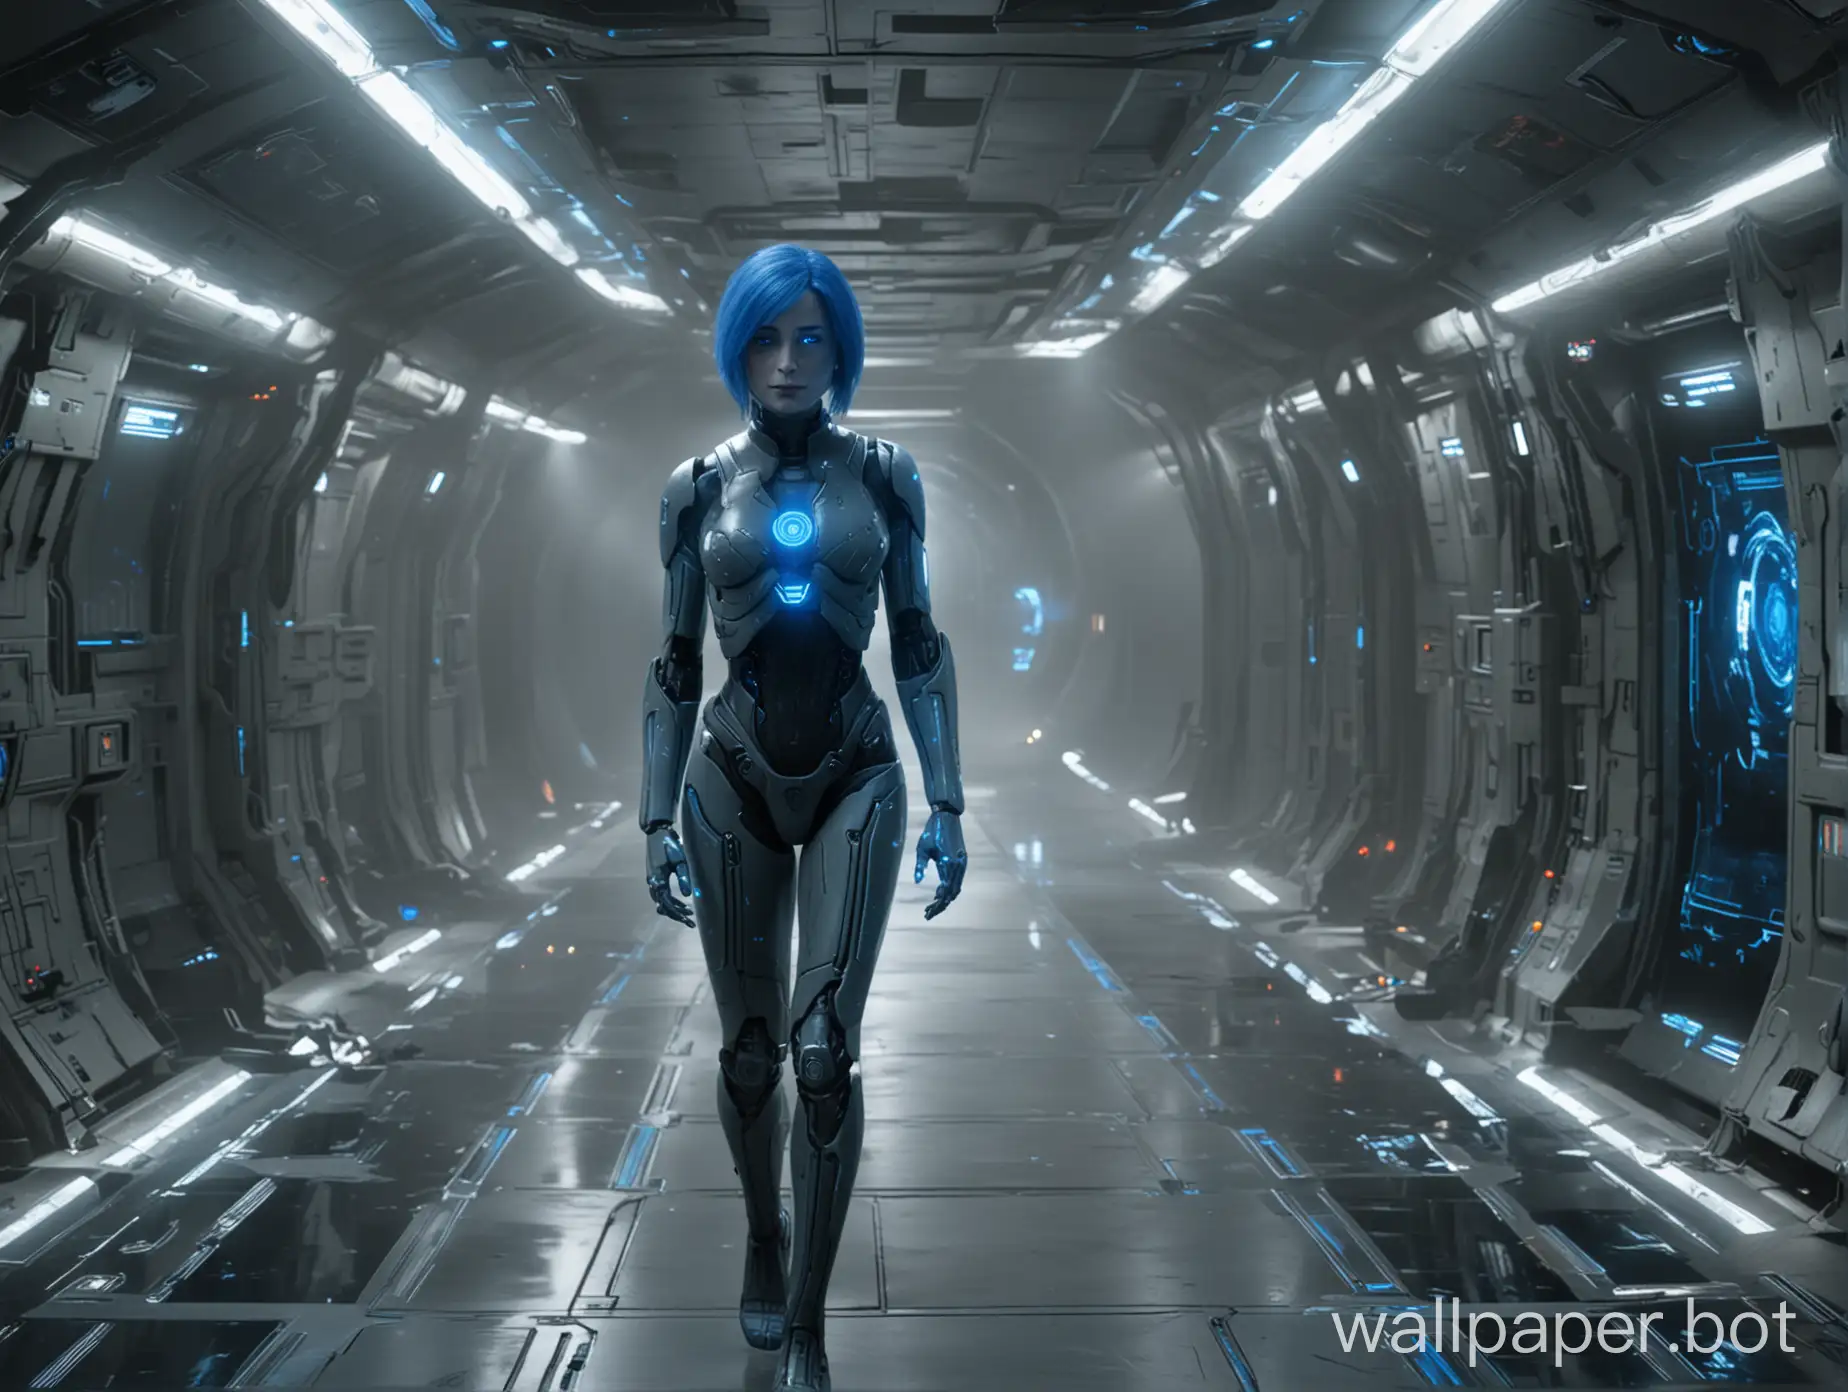 Cortana from Halo game is walking in a spaceship corridor. Bright blue eyes. Blue hair is flowing